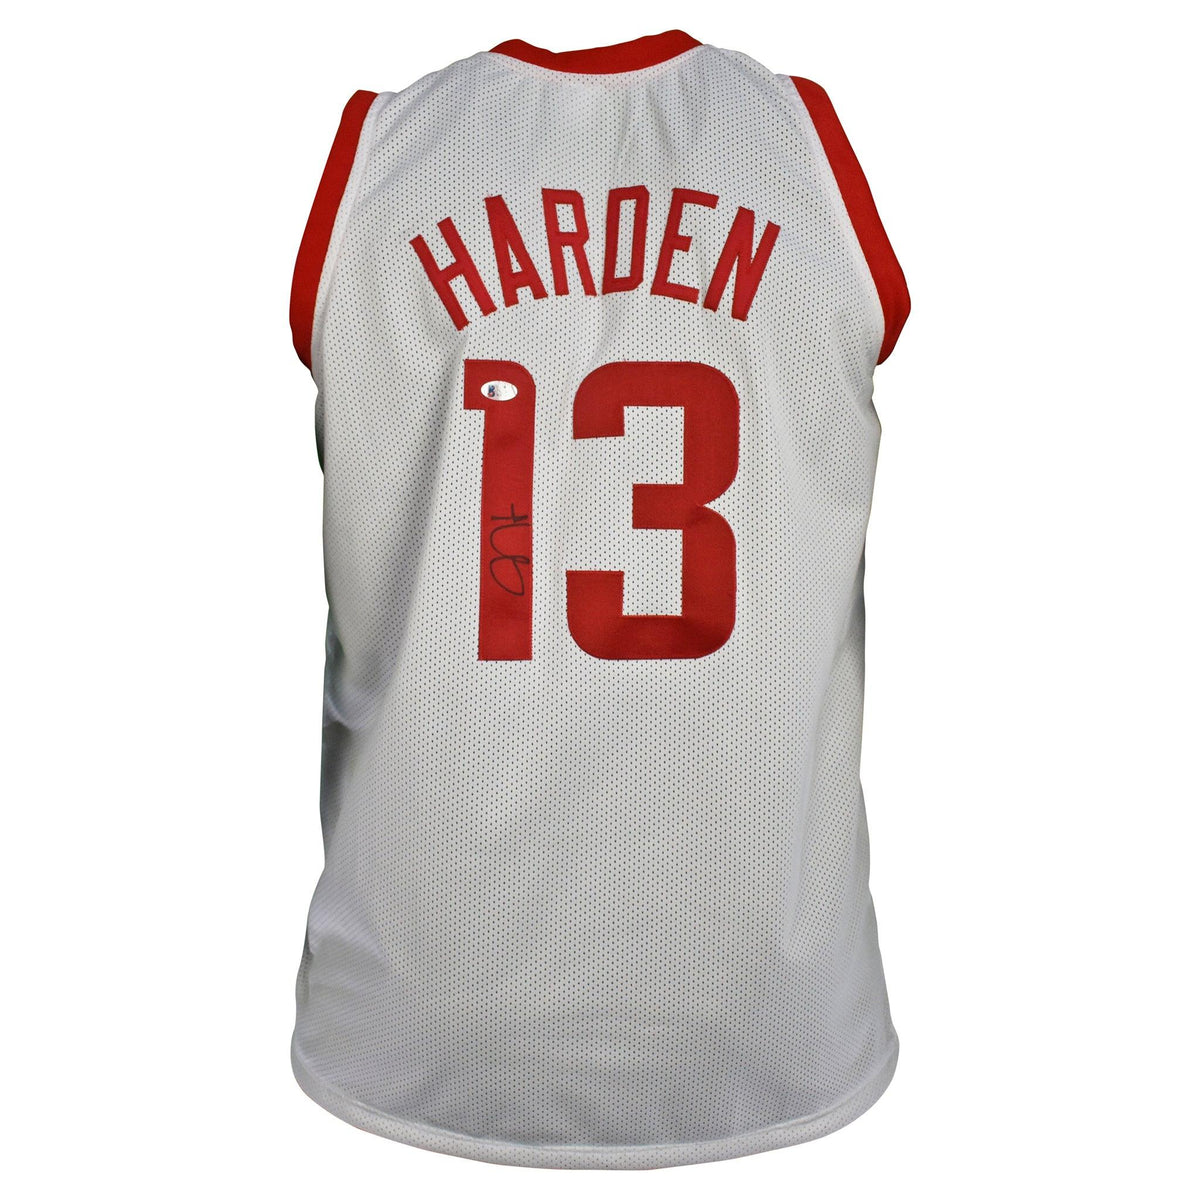 James Harden Autographed and Framed Red Houston Rockets Jersey